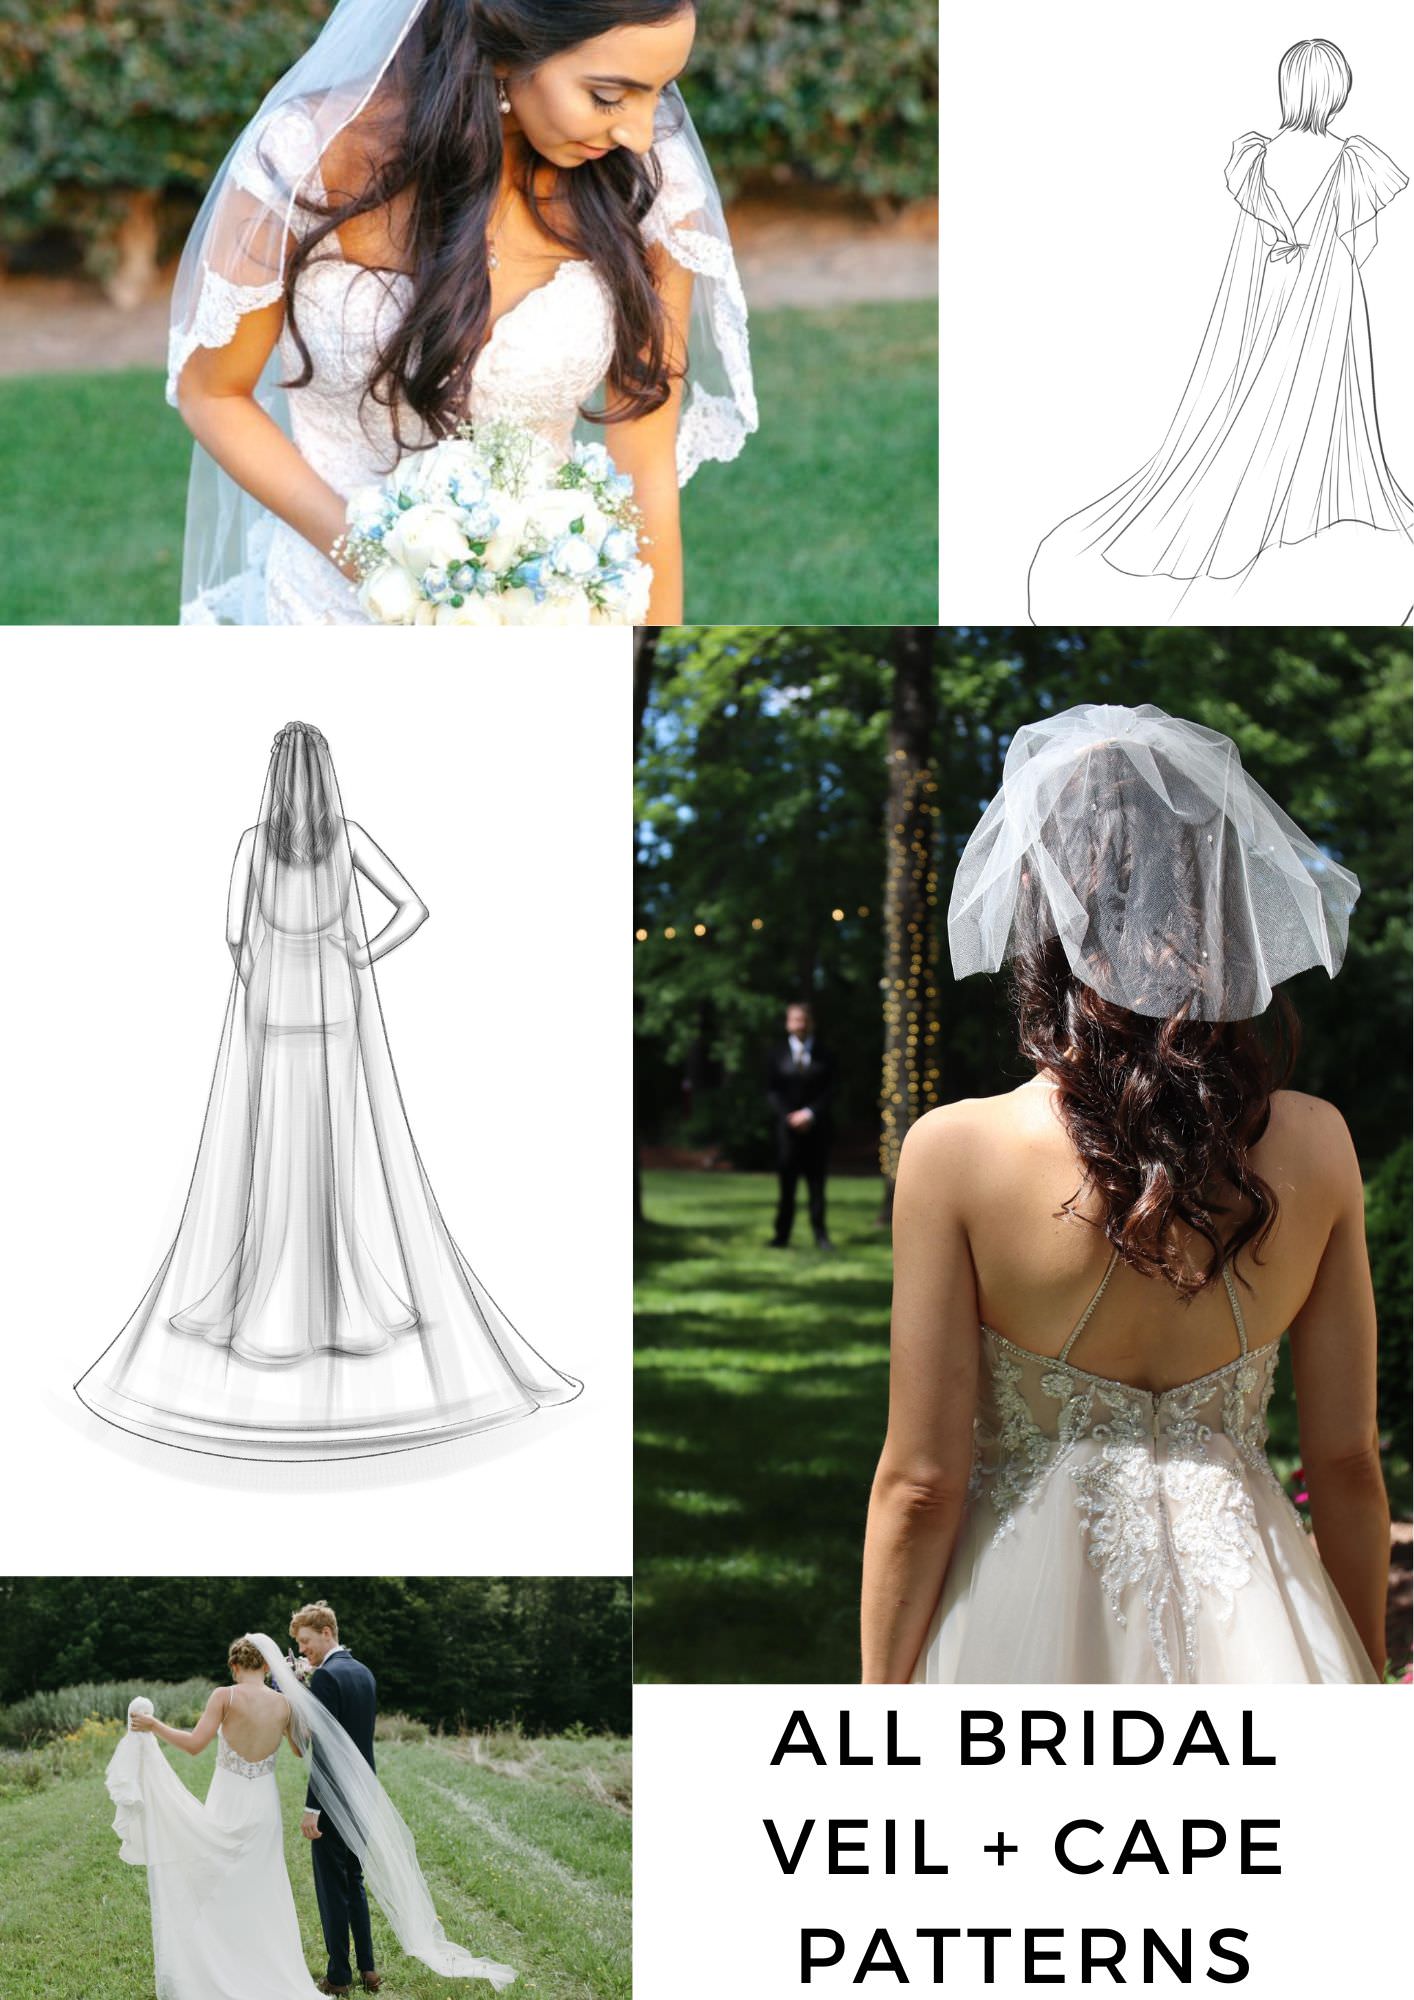 how to make a wedding veil and bridal cape for wedding alterations seamstresses